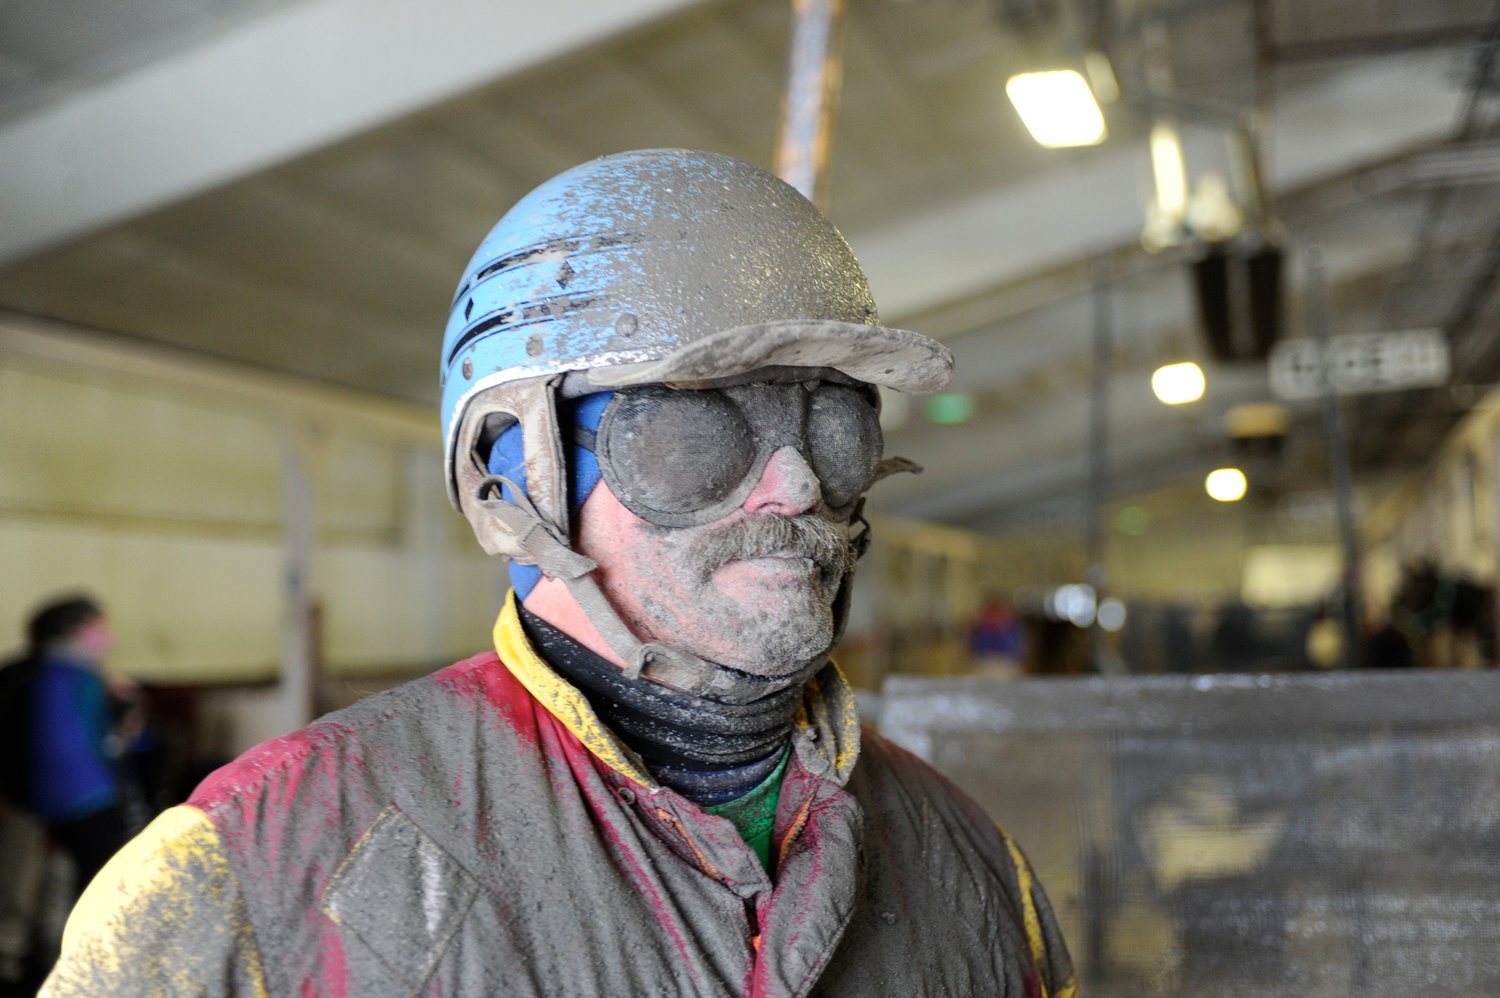 Here’s mud in your face! Veteran horseman driver Bobby Merton returned to the paddock after a warm-up circuit on the muddy track. The racing card for January 5 was canceled due to hazardous conditions as the track thawed.